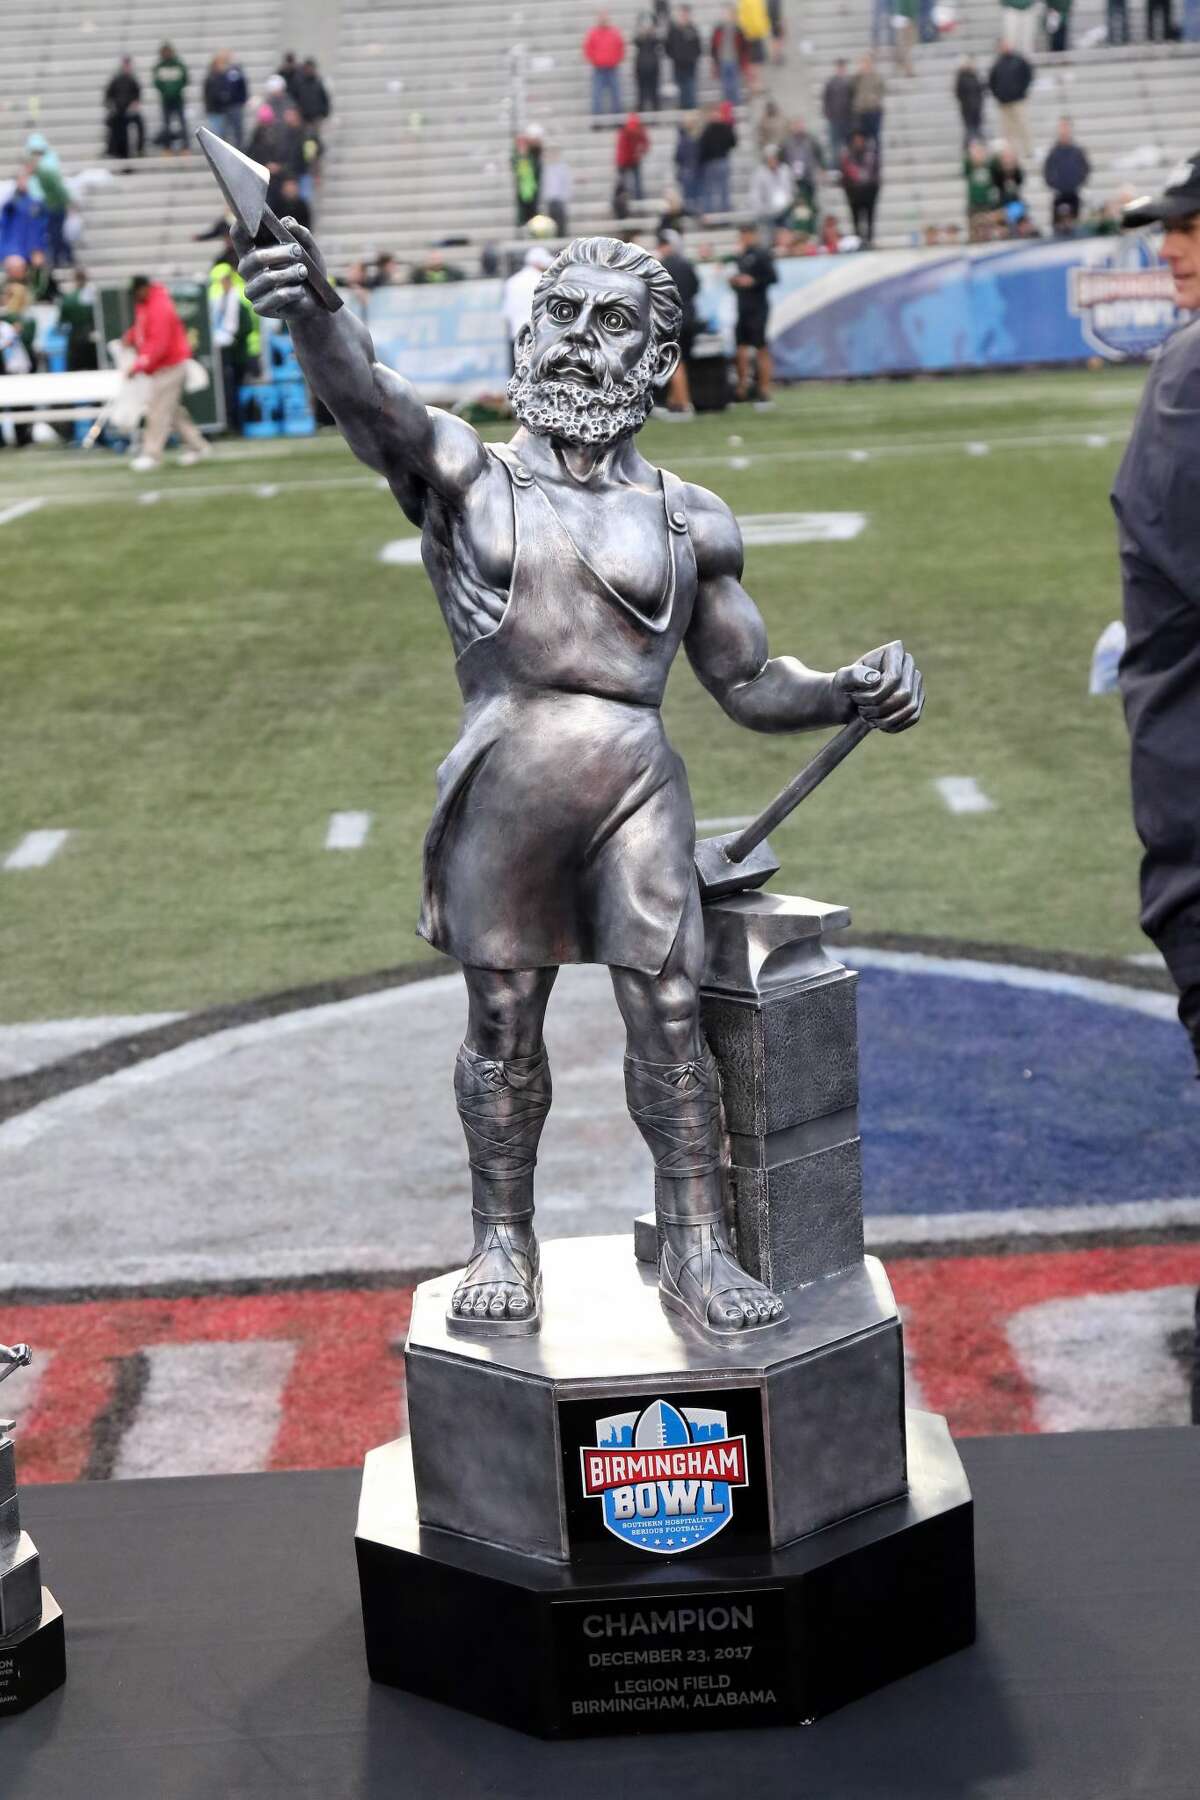 The Birmingham Bowl trophy that the University of Houston brought home Tuesday is of Vulcan, the Roman god of fire and forge. A larger statue of the god is located in Birmingham as a tribute to the city's iron industry.